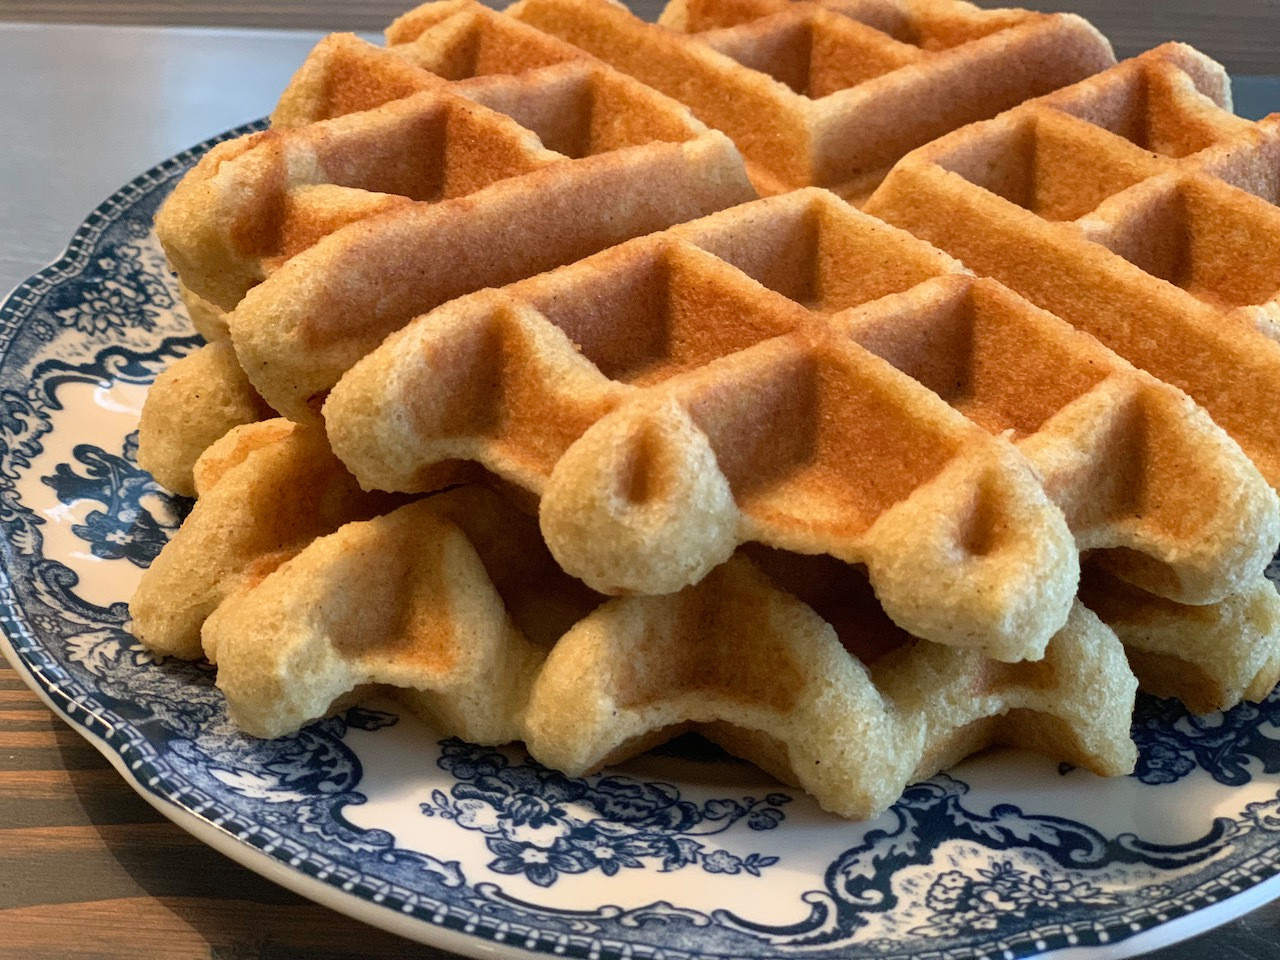 Low Carb Keto Waffles
 The BEST Most Delicious Low Carb Keto Waffle Recipe EVER